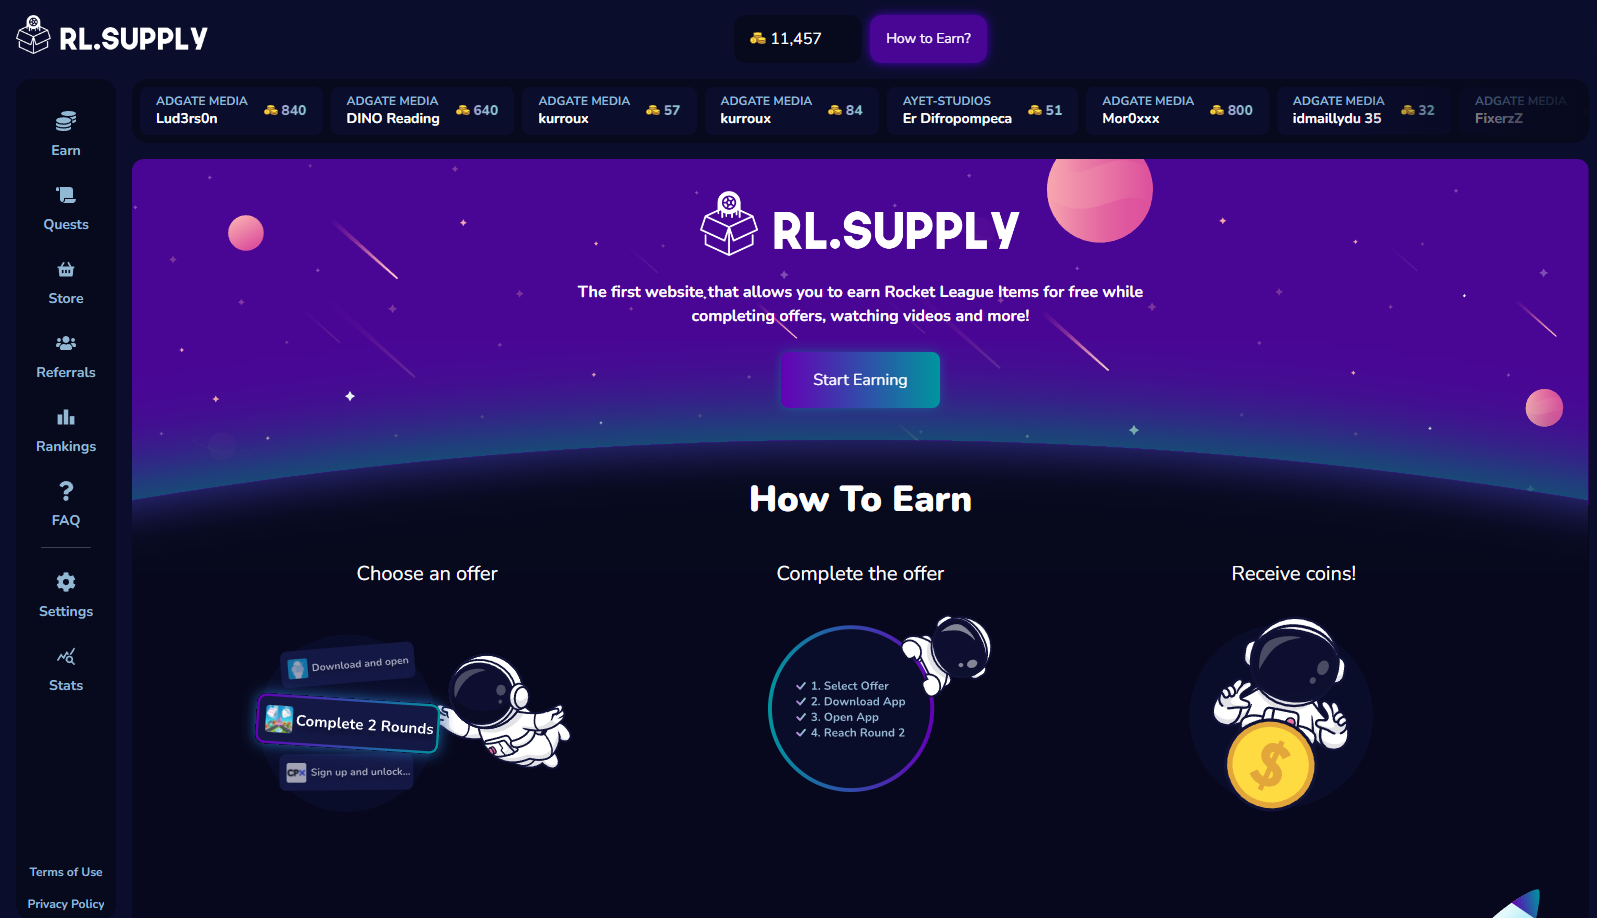 Home page of rl.supply